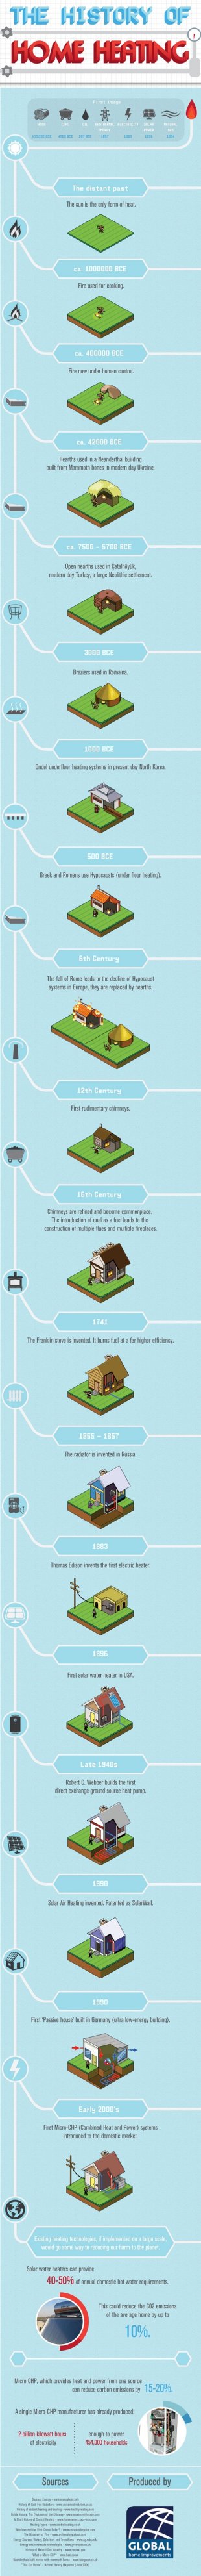 The History of Home Heating [Infographic] image history of home heating21 resize